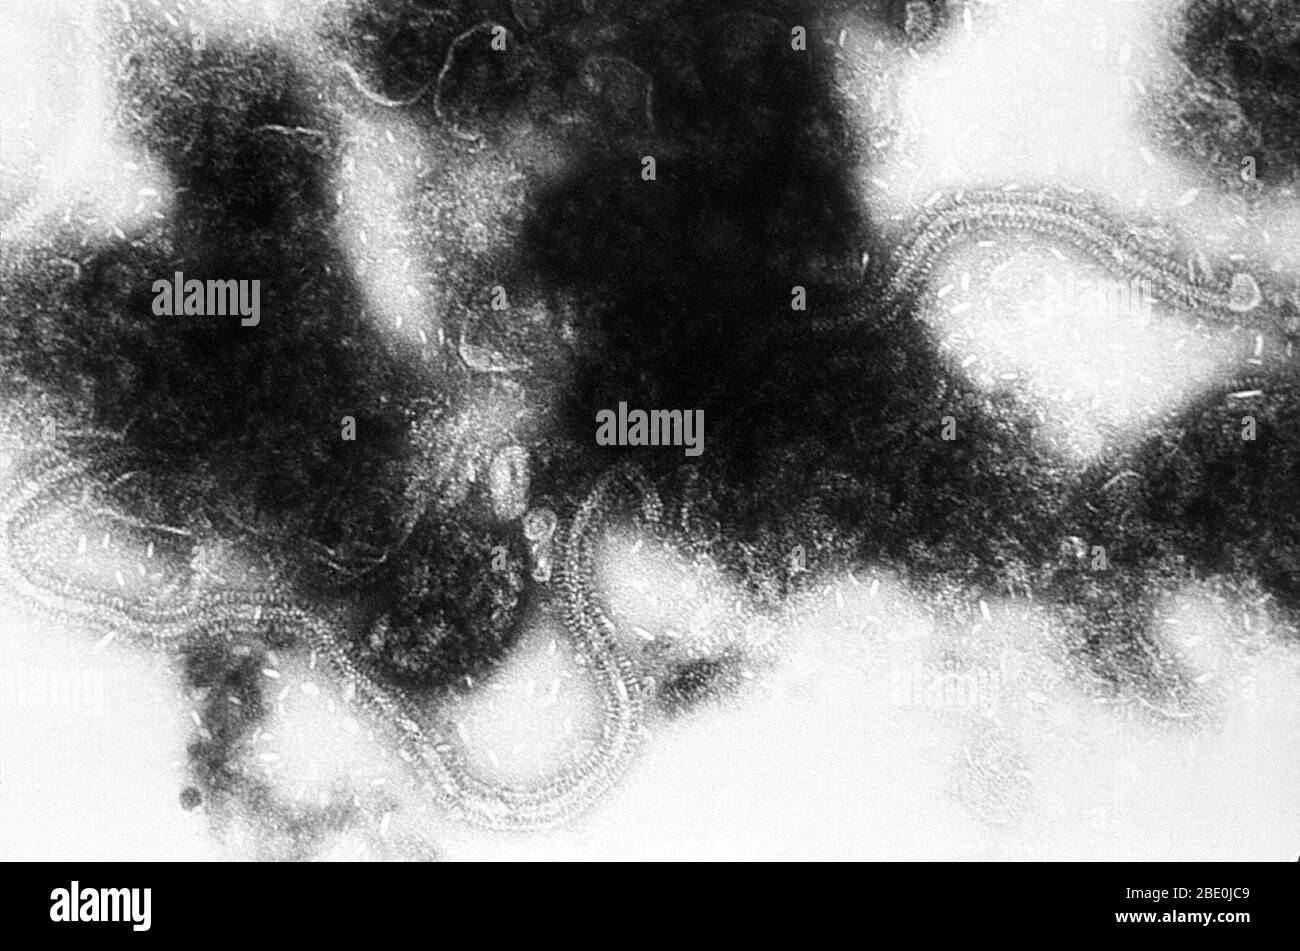 Transmission Electron Micrograph (TEM) of the human respiratory syncytial virus pathogen. Human respiratory syncytial virus (HRSV) is a negative-sense, single-stranded RNA virus of the family Pneumoviridae. Its name comes from the fact that F proteins on the surface of the virus cause the cell membranes on nearby cells to merge, forming syncytia. HRSV is a syncytial (multinucleated cell that can result from multiple cell fusions of uninuclear cells) virus that causes respiratory tract infections. It is a major cause of lower respiratory tract infections and hospital visits during infancy and c Stock Photo